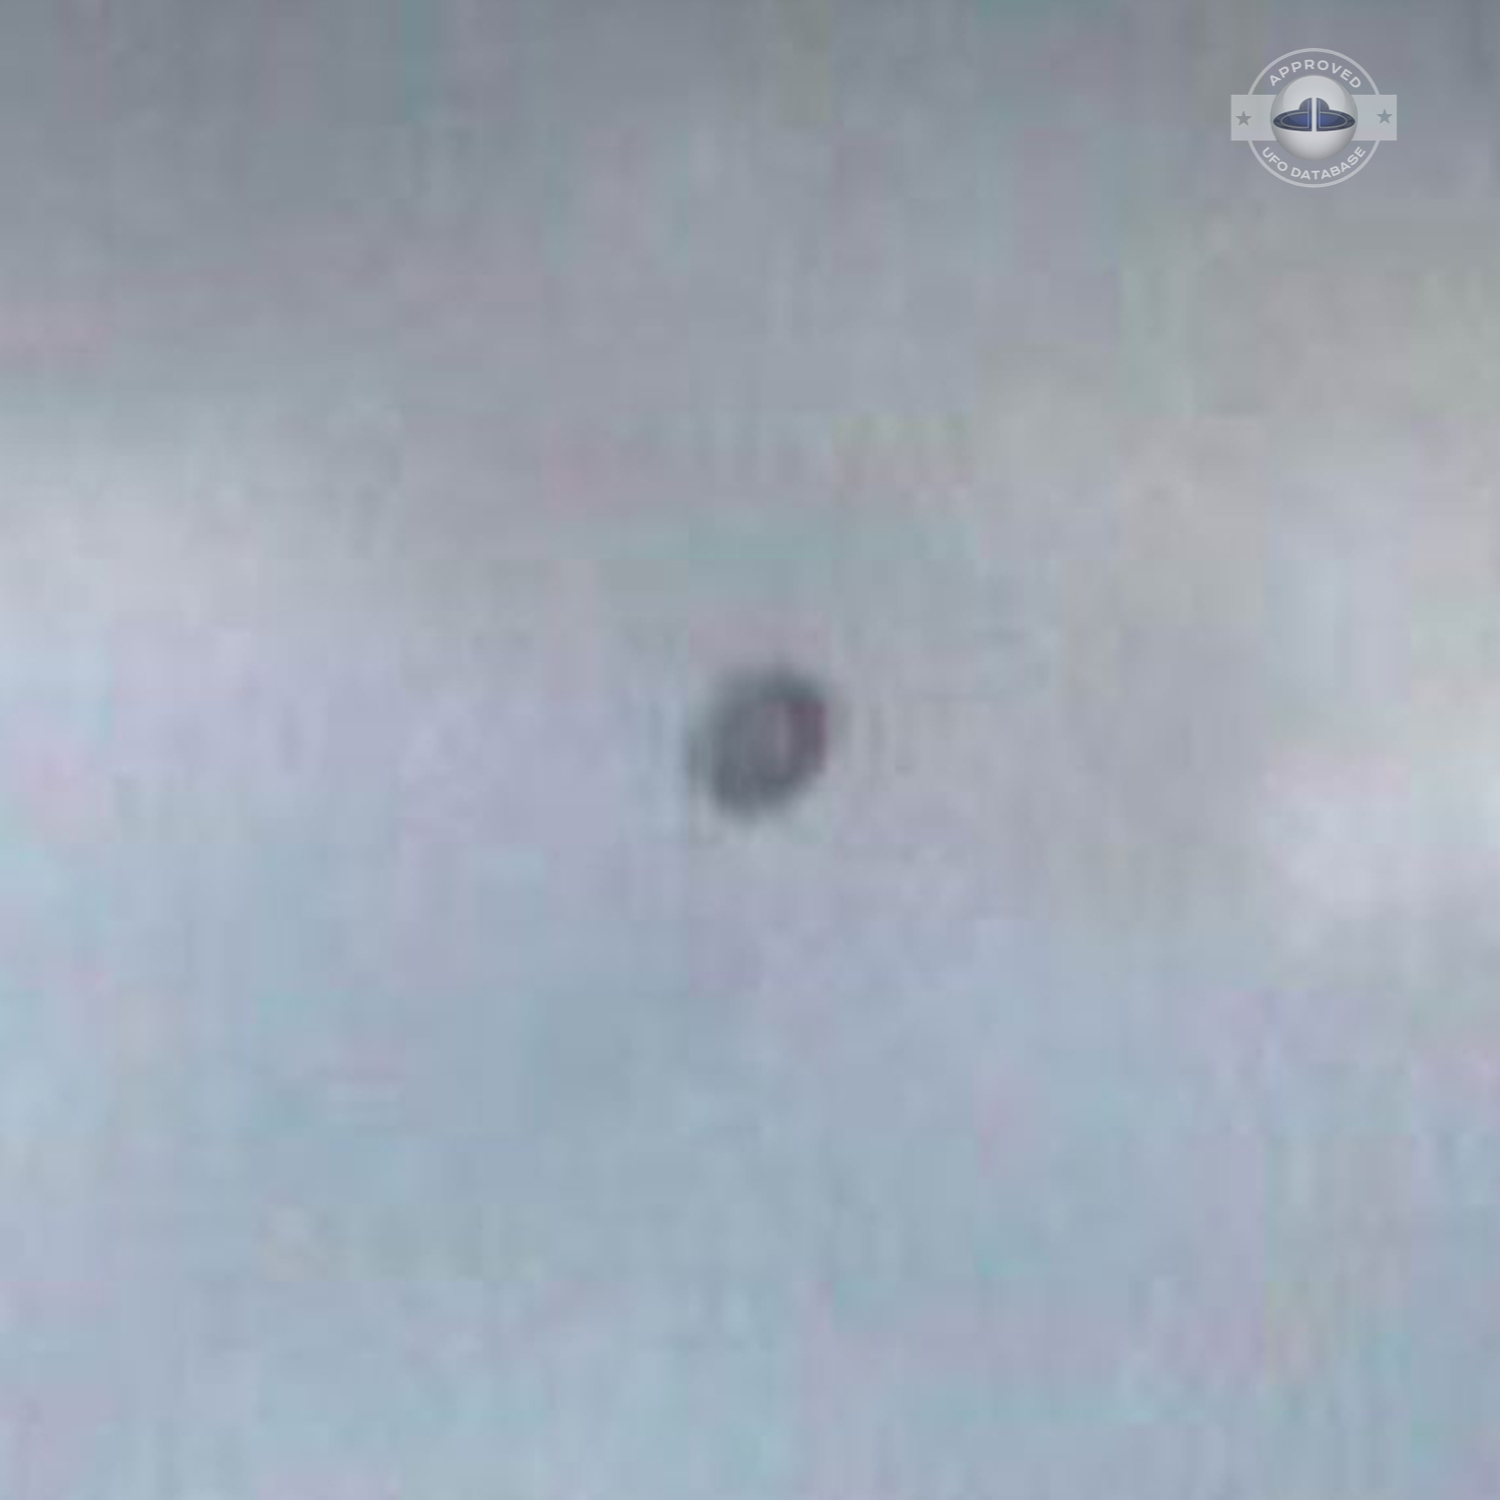 UFO Pictures UFOdB.com - UFO near airplane in England in 2002 UFO Picture #63-3